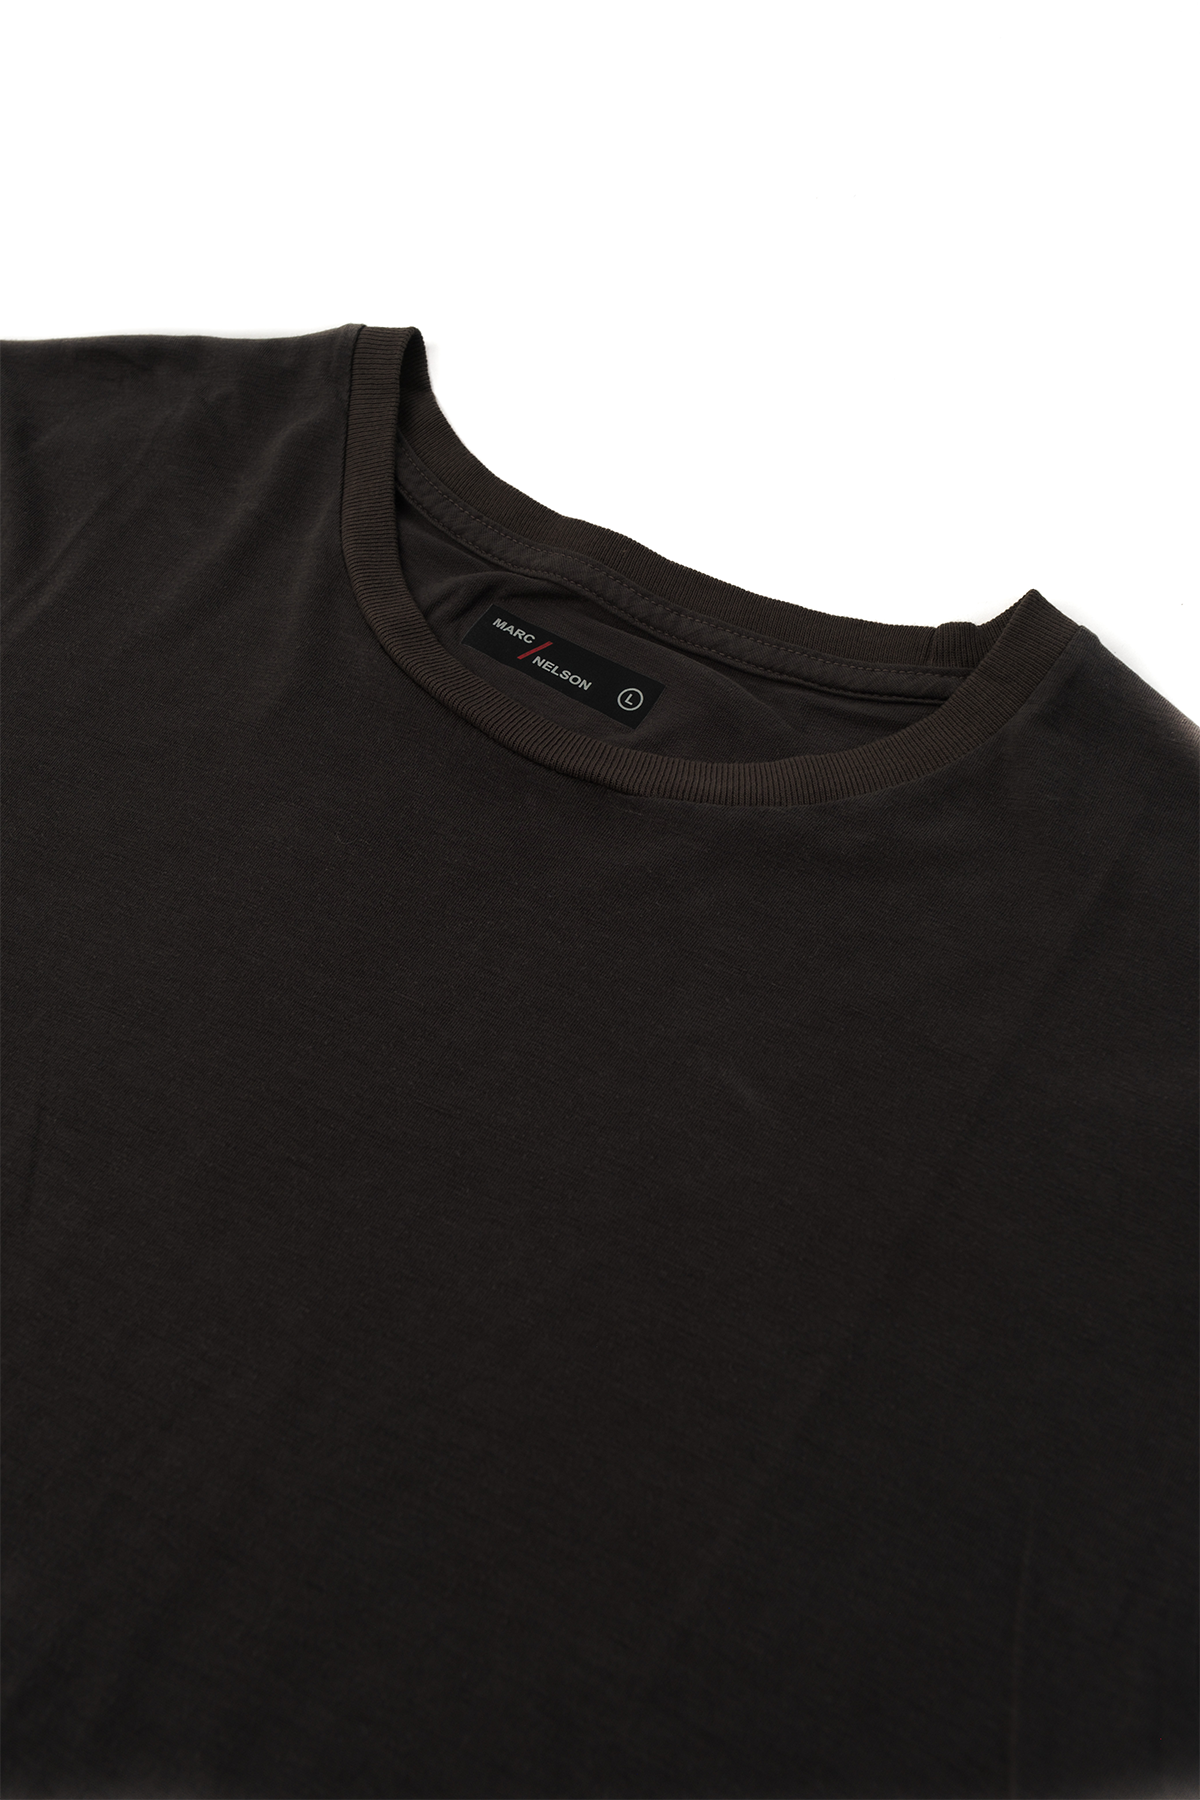 Close up of a black crew neck t-shirt laid out on a white background.